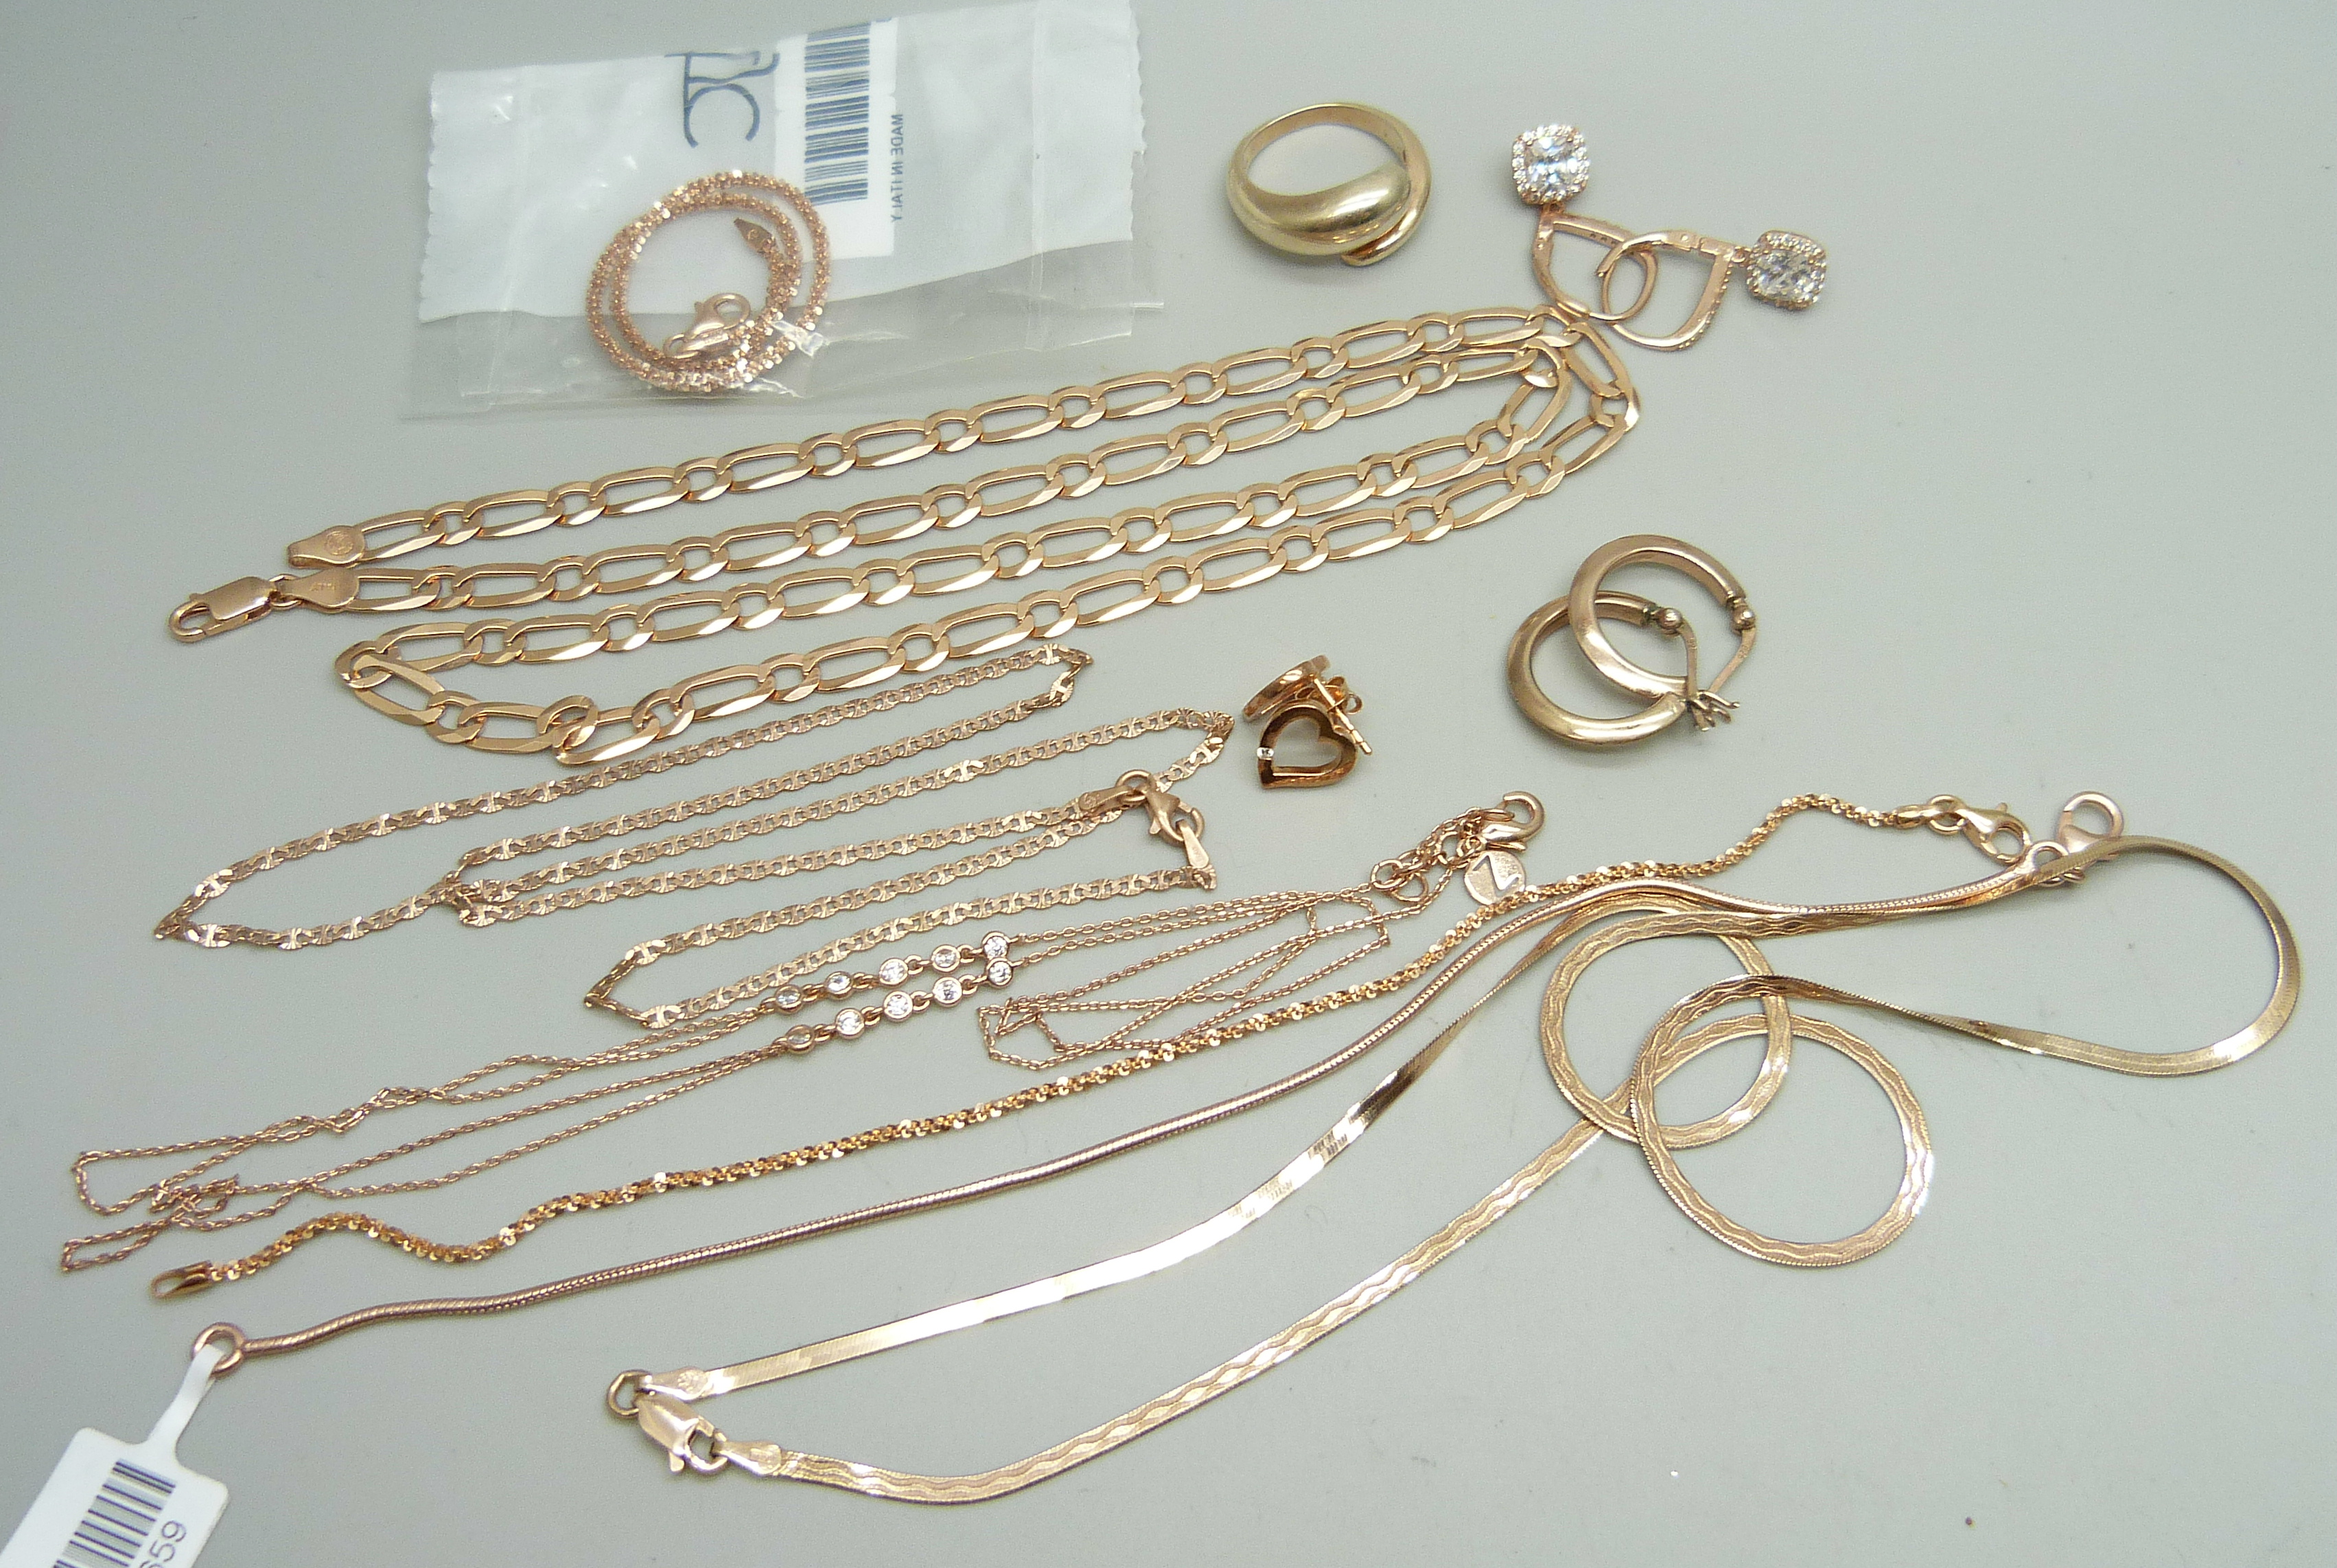 Rose gold gilt silver jewellery including a figaro chain necklace, mariner link necklace, flat snake